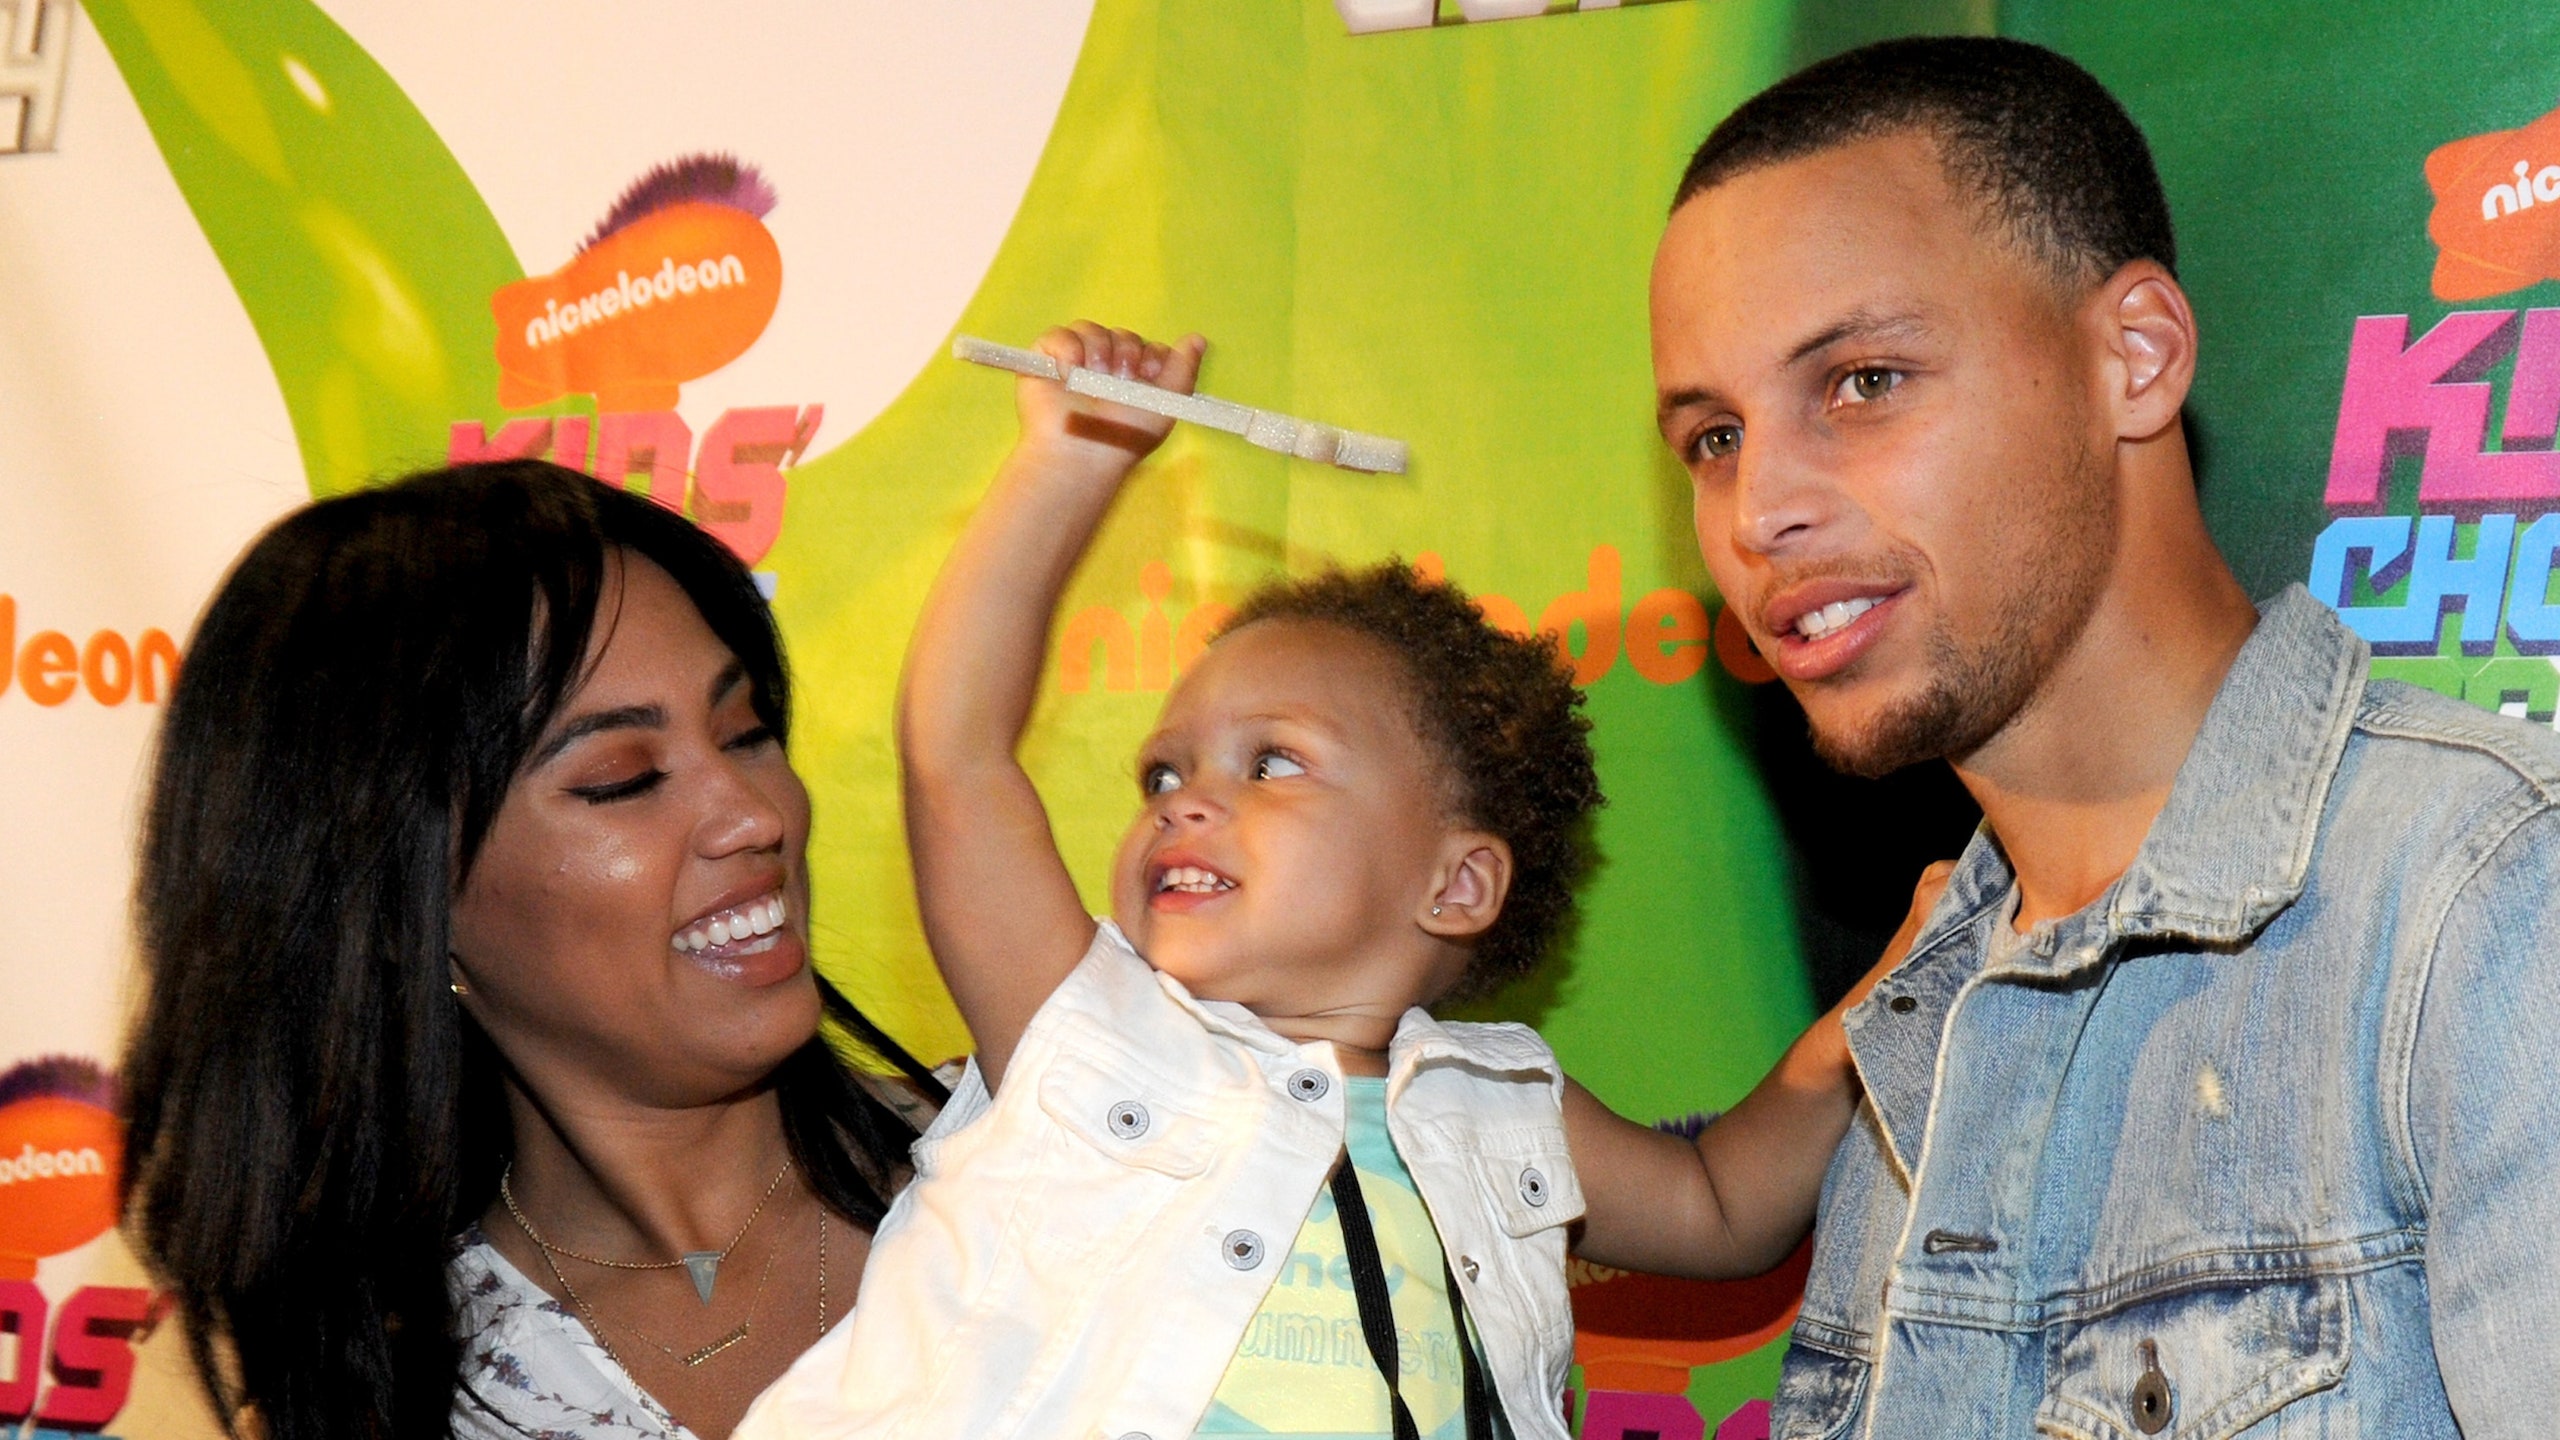 likhoa stephen curry shares heartfelt throwback moments with daughter riley from years ago surprising online community 654264d25d5dd Stephen Curry Shares Heartfelt Throwback Moments With Daughter Riley From 10 Years Ago, Surprising Online Community